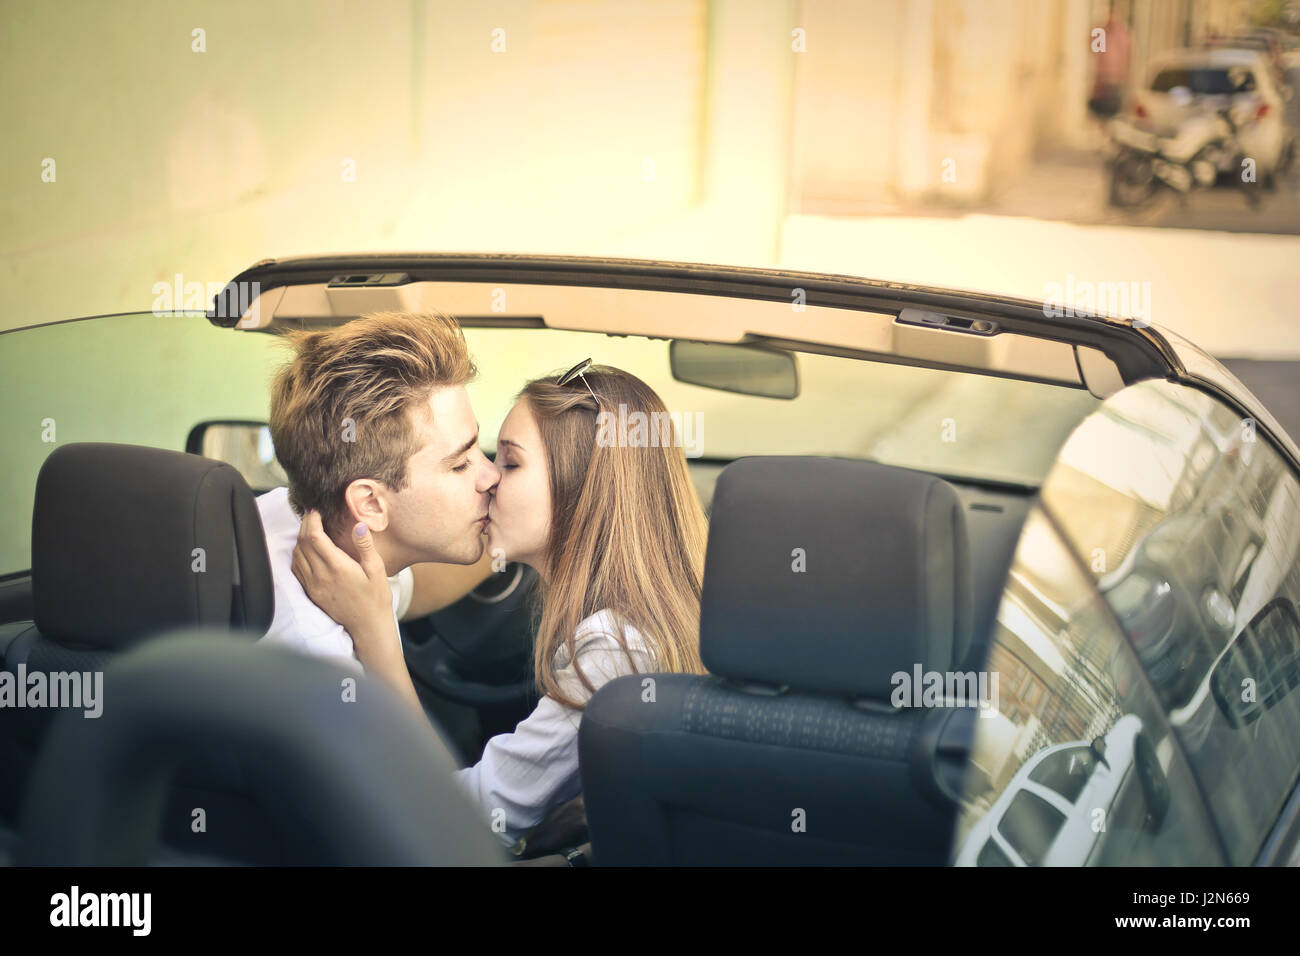 Young couple kissing in car Stock Photo